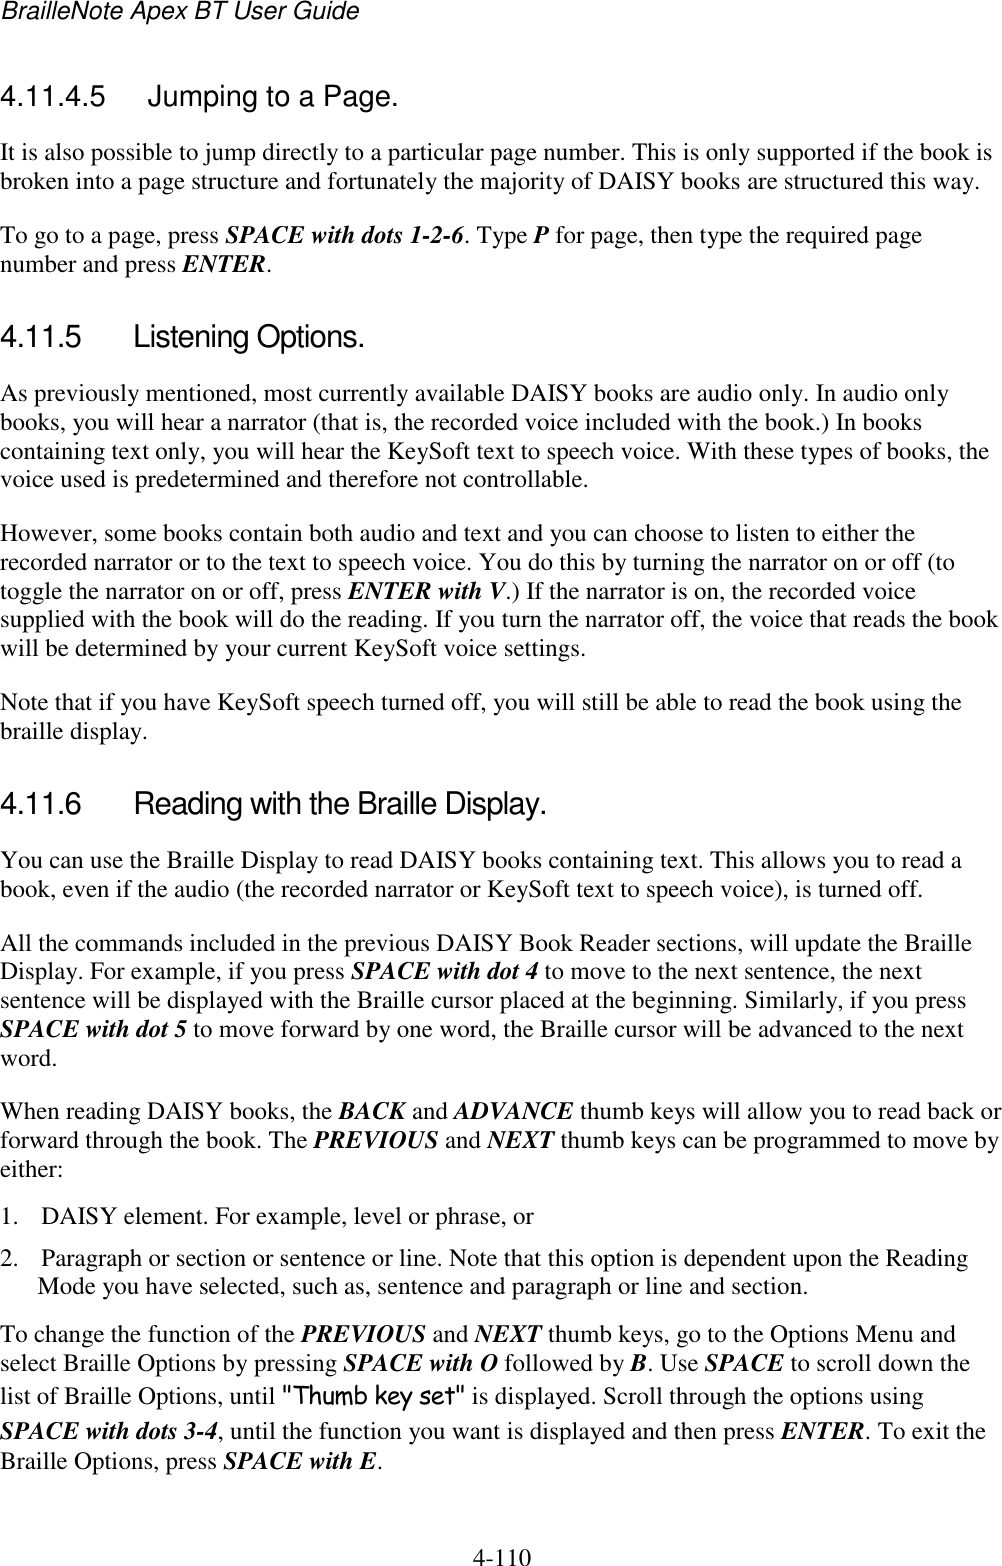 BrailleNote Apex BT User Guide   4-110   4.11.4.5  Jumping to a Page. It is also possible to jump directly to a particular page number. This is only supported if the book is broken into a page structure and fortunately the majority of DAISY books are structured this way.  To go to a page, press SPACE with dots 1-2-6. Type P for page, then type the required page number and press ENTER.  4.11.5  Listening Options. As previously mentioned, most currently available DAISY books are audio only. In audio only books, you will hear a narrator (that is, the recorded voice included with the book.) In books containing text only, you will hear the KeySoft text to speech voice. With these types of books, the voice used is predetermined and therefore not controllable.  However, some books contain both audio and text and you can choose to listen to either the recorded narrator or to the text to speech voice. You do this by turning the narrator on or off (to toggle the narrator on or off, press ENTER with V.) If the narrator is on, the recorded voice supplied with the book will do the reading. If you turn the narrator off, the voice that reads the book will be determined by your current KeySoft voice settings.  Note that if you have KeySoft speech turned off, you will still be able to read the book using the braille display.  4.11.6  Reading with the Braille Display. You can use the Braille Display to read DAISY books containing text. This allows you to read a book, even if the audio (the recorded narrator or KeySoft text to speech voice), is turned off. All the commands included in the previous DAISY Book Reader sections, will update the Braille Display. For example, if you press SPACE with dot 4 to move to the next sentence, the next sentence will be displayed with the Braille cursor placed at the beginning. Similarly, if you press SPACE with dot 5 to move forward by one word, the Braille cursor will be advanced to the next word. When reading DAISY books, the BACK and ADVANCE thumb keys will allow you to read back or forward through the book. The PREVIOUS and NEXT thumb keys can be programmed to move by either: 1. DAISY element. For example, level or phrase, or 2. Paragraph or section or sentence or line. Note that this option is dependent upon the Reading Mode you have selected, such as, sentence and paragraph or line and section. To change the function of the PREVIOUS and NEXT thumb keys, go to the Options Menu and select Braille Options by pressing SPACE with O followed by B. Use SPACE to scroll down the list of Braille Options, until &quot;Thumb key set&quot; is displayed. Scroll through the options using SPACE with dots 3-4, until the function you want is displayed and then press ENTER. To exit the Braille Options, press SPACE with E.  